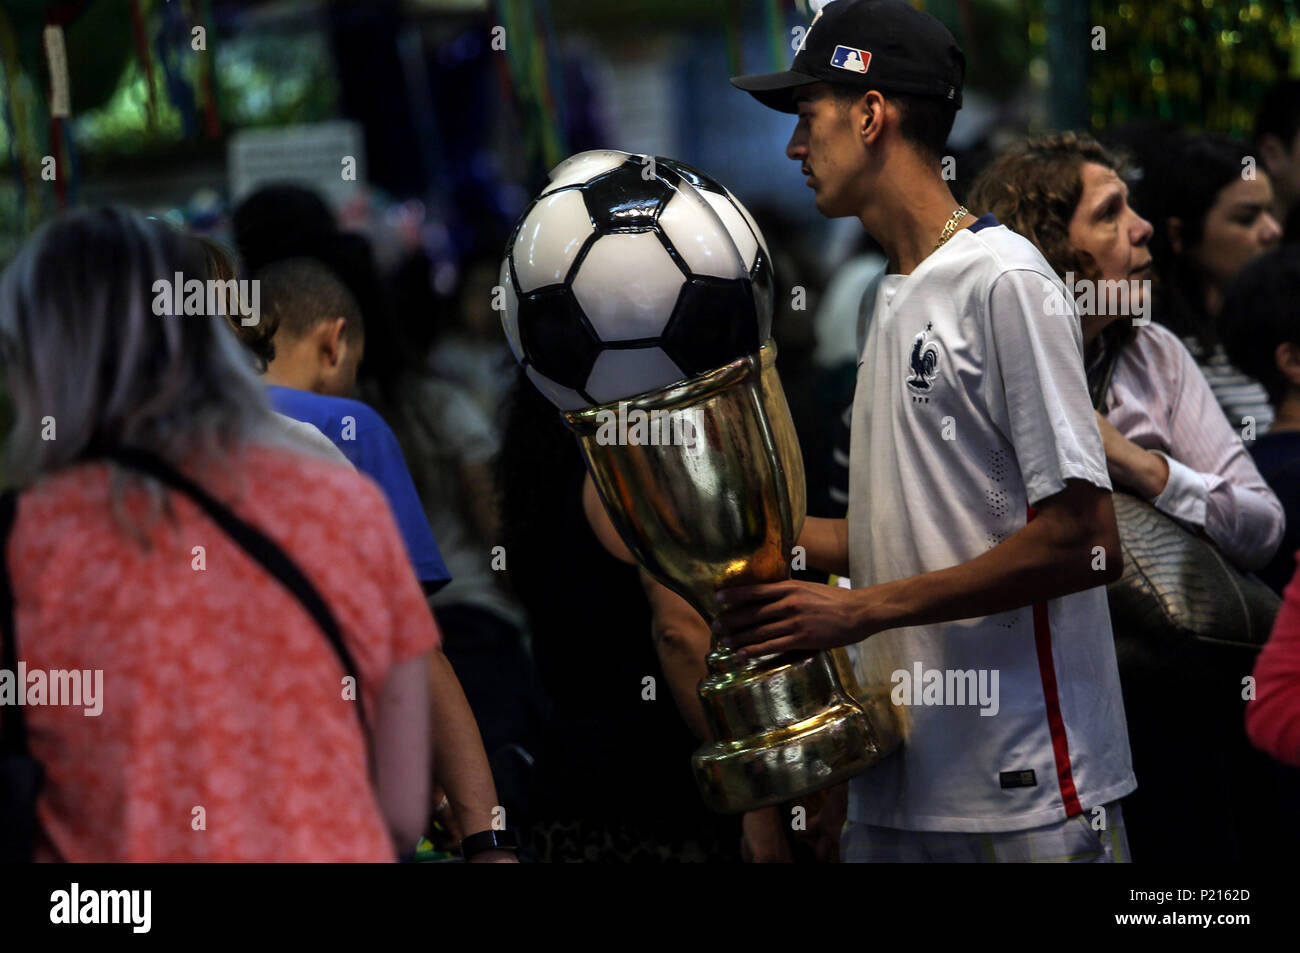 Sao Paulo, June 13. 15th July, 2018. A man holds a trophy at a store in Sao Paulo, Brazil, on June 13, 2018. The Russia 2018 FIFA World Cup will be held from June 14 to July 15, 2018. Credit: Rahel Patrasso/Xinhua/Alamy Live News Stock Photo